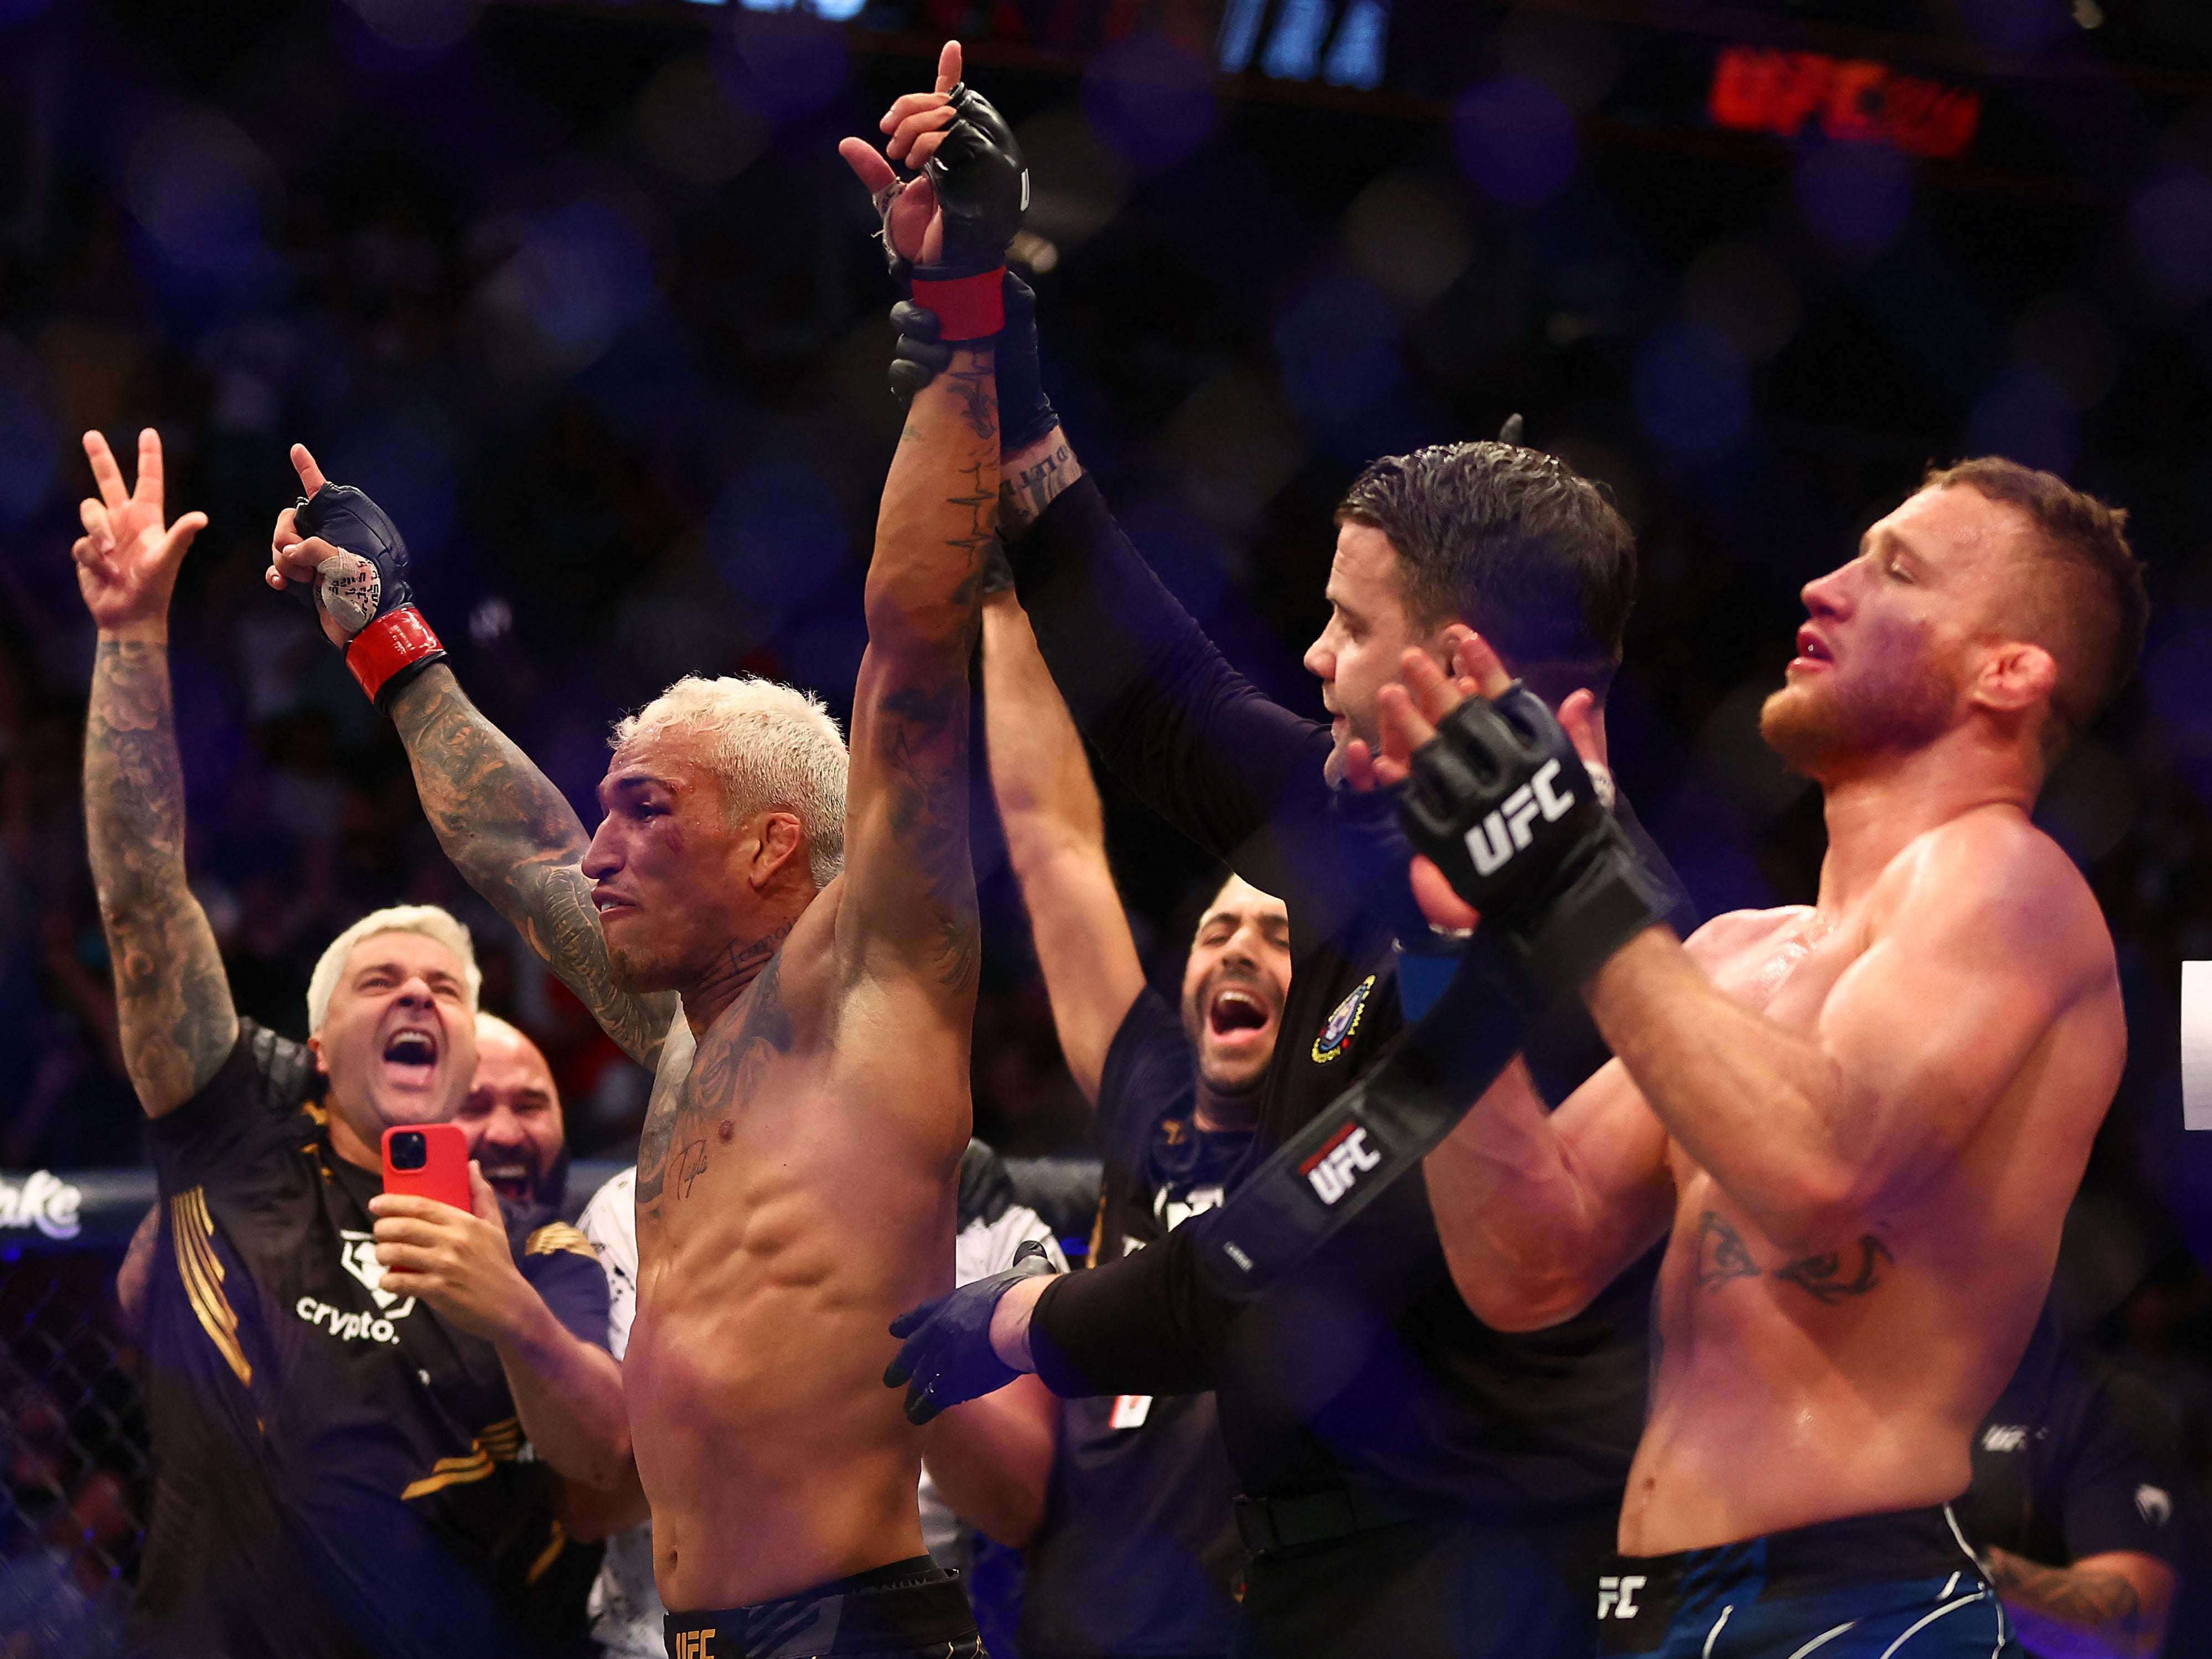 Charles Oliveira beat Justin Gaethje via first-round submission